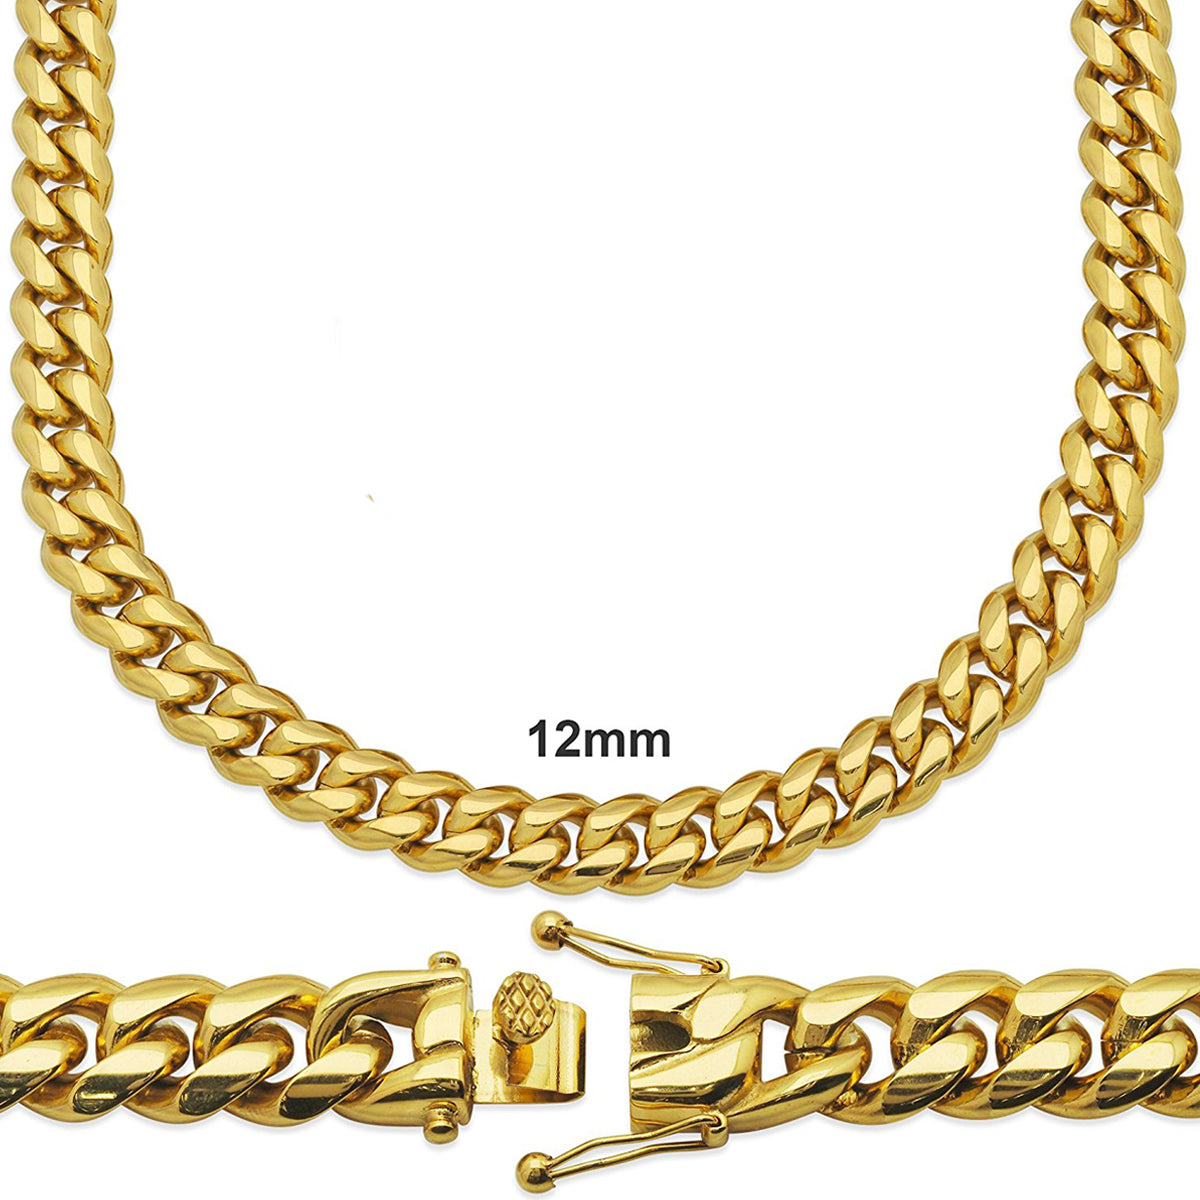 Stainless Steel 12mm 18" Plain Miami Cuban necklace